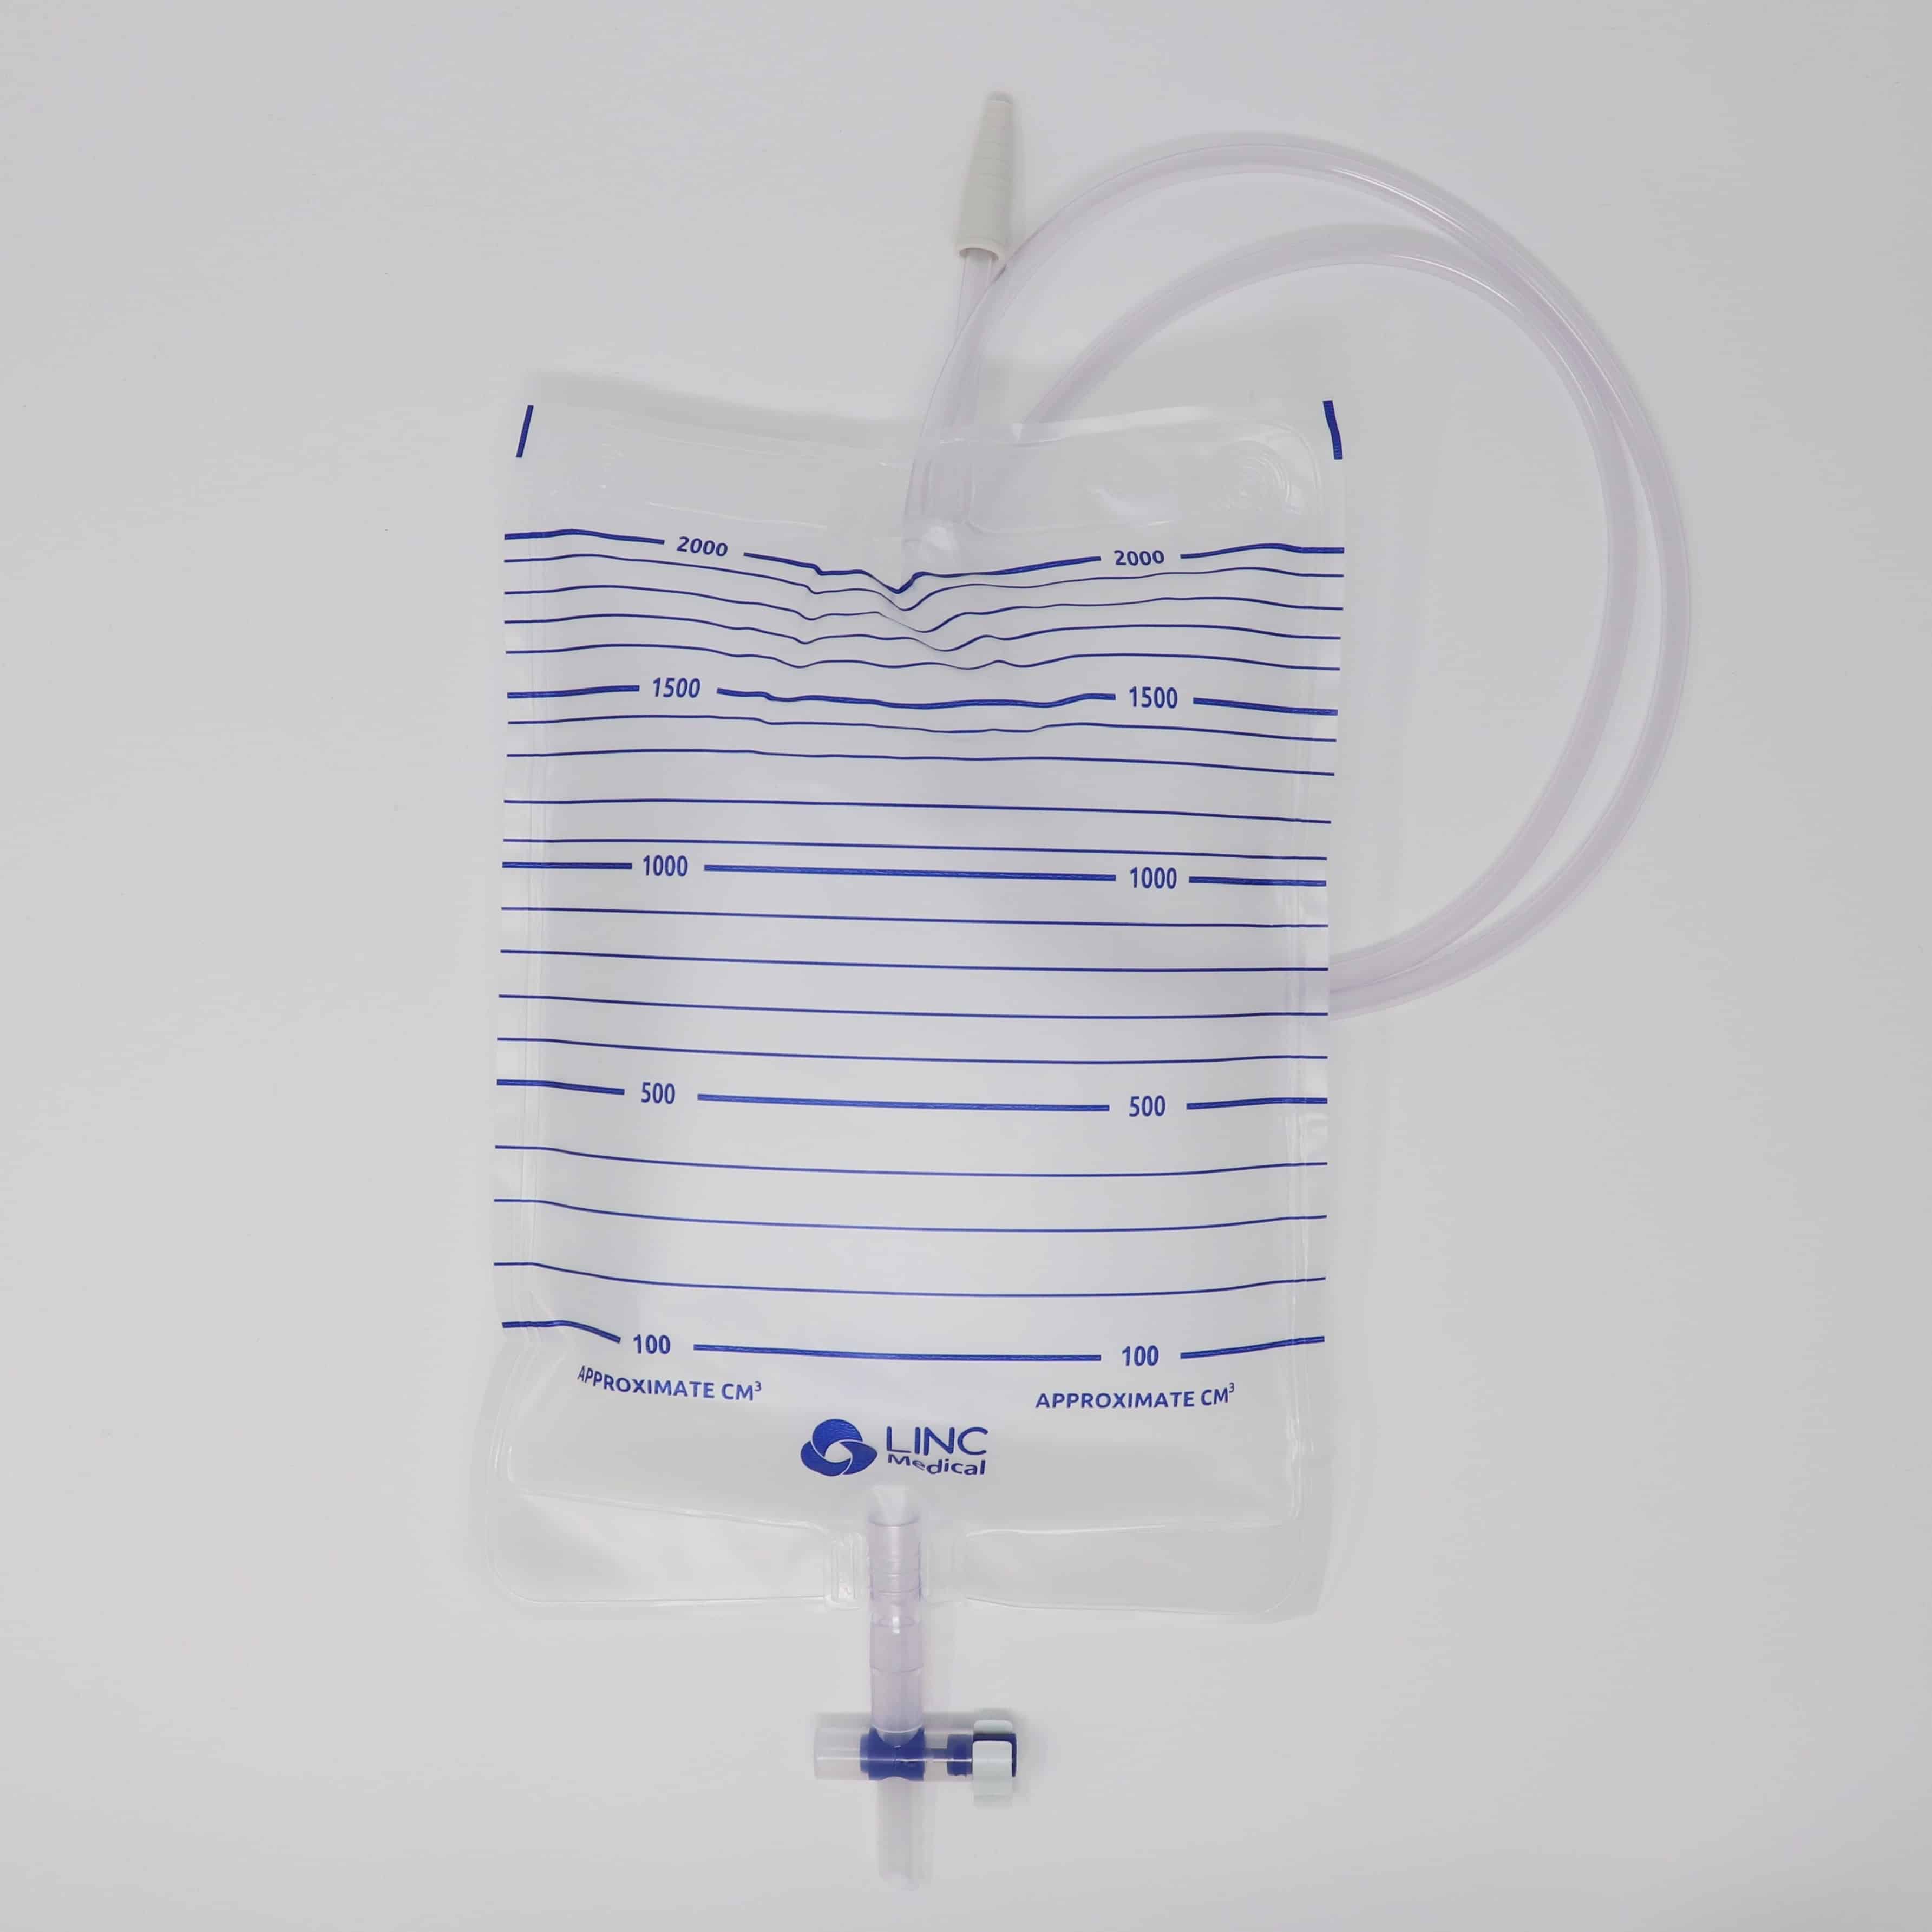 Dover™ Urine Drainage Bags & Meters | Cardinal Health